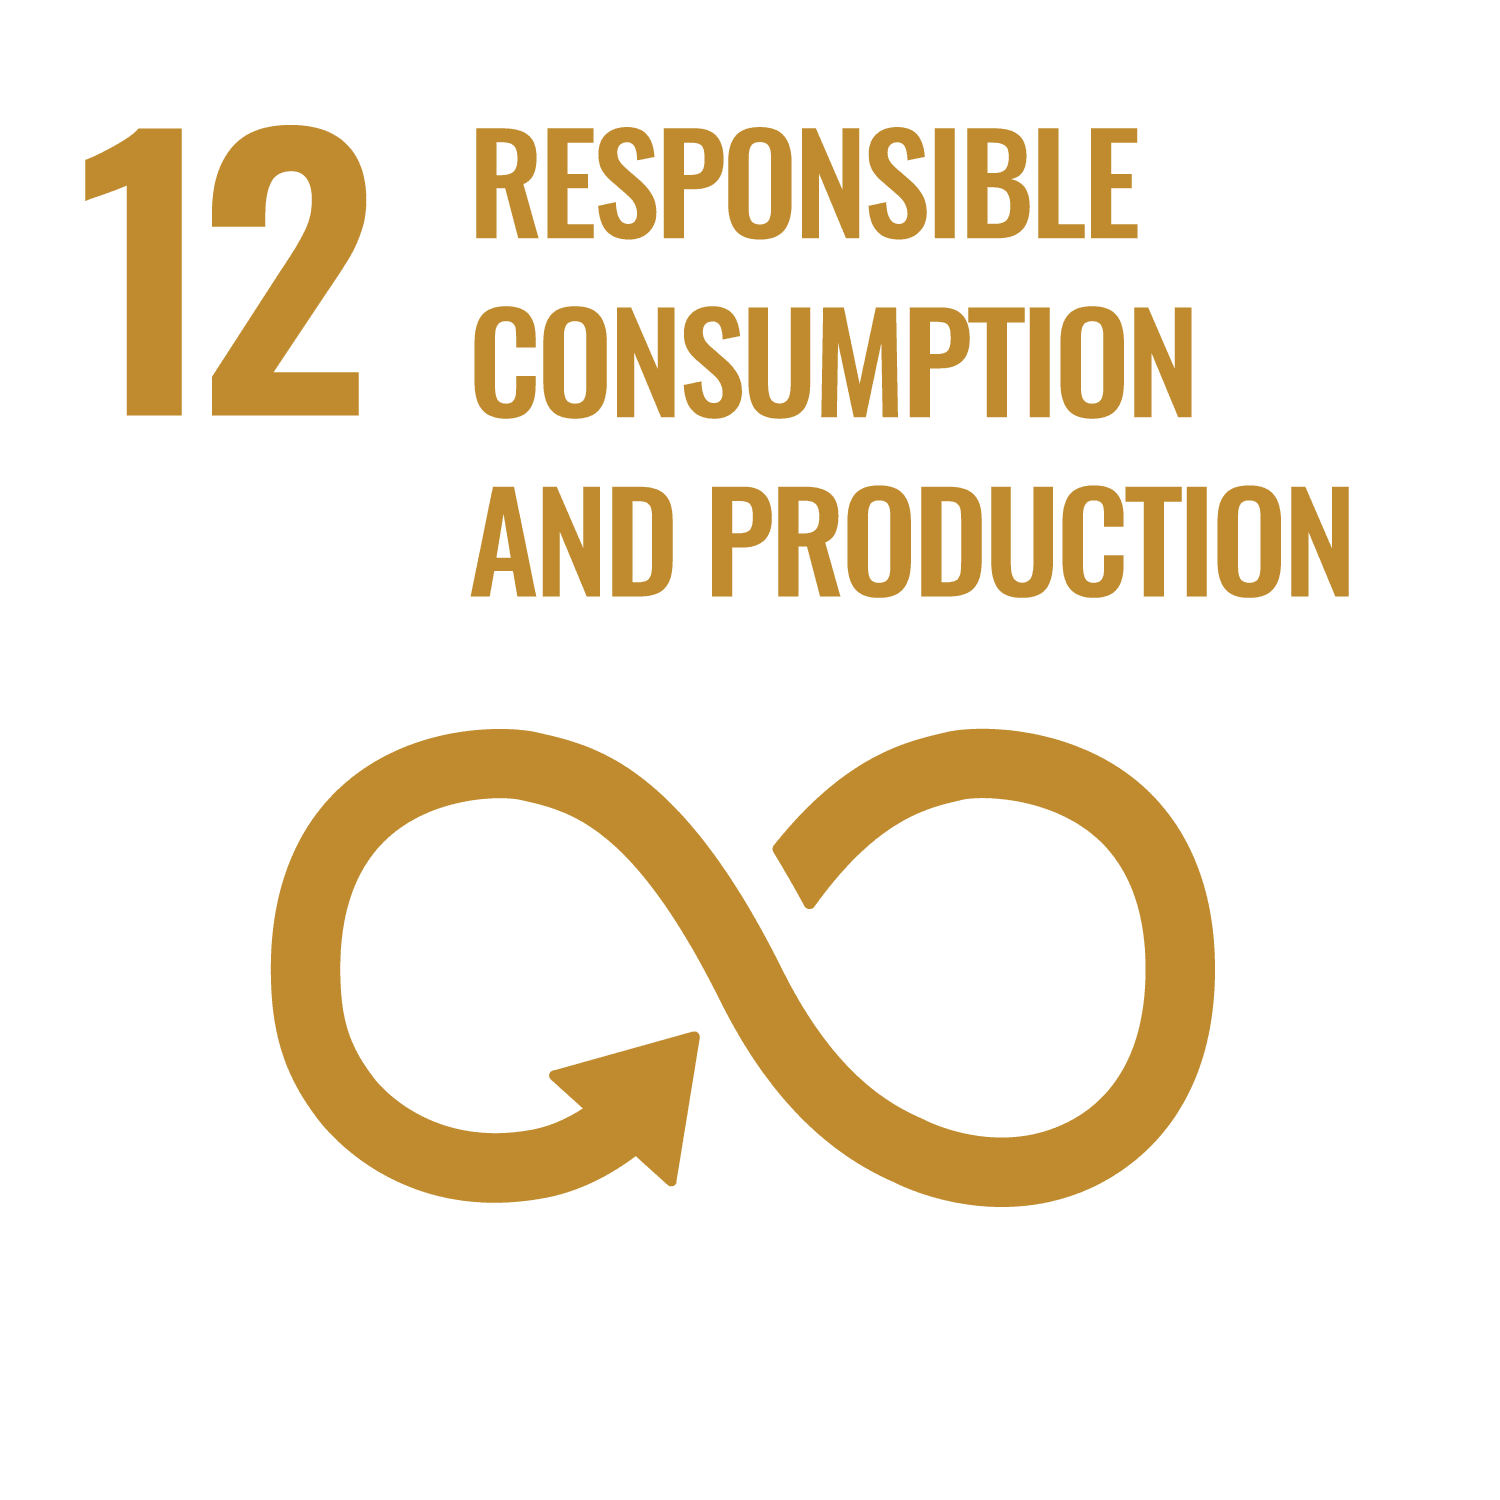 Goal 12, Responsible consumption and production